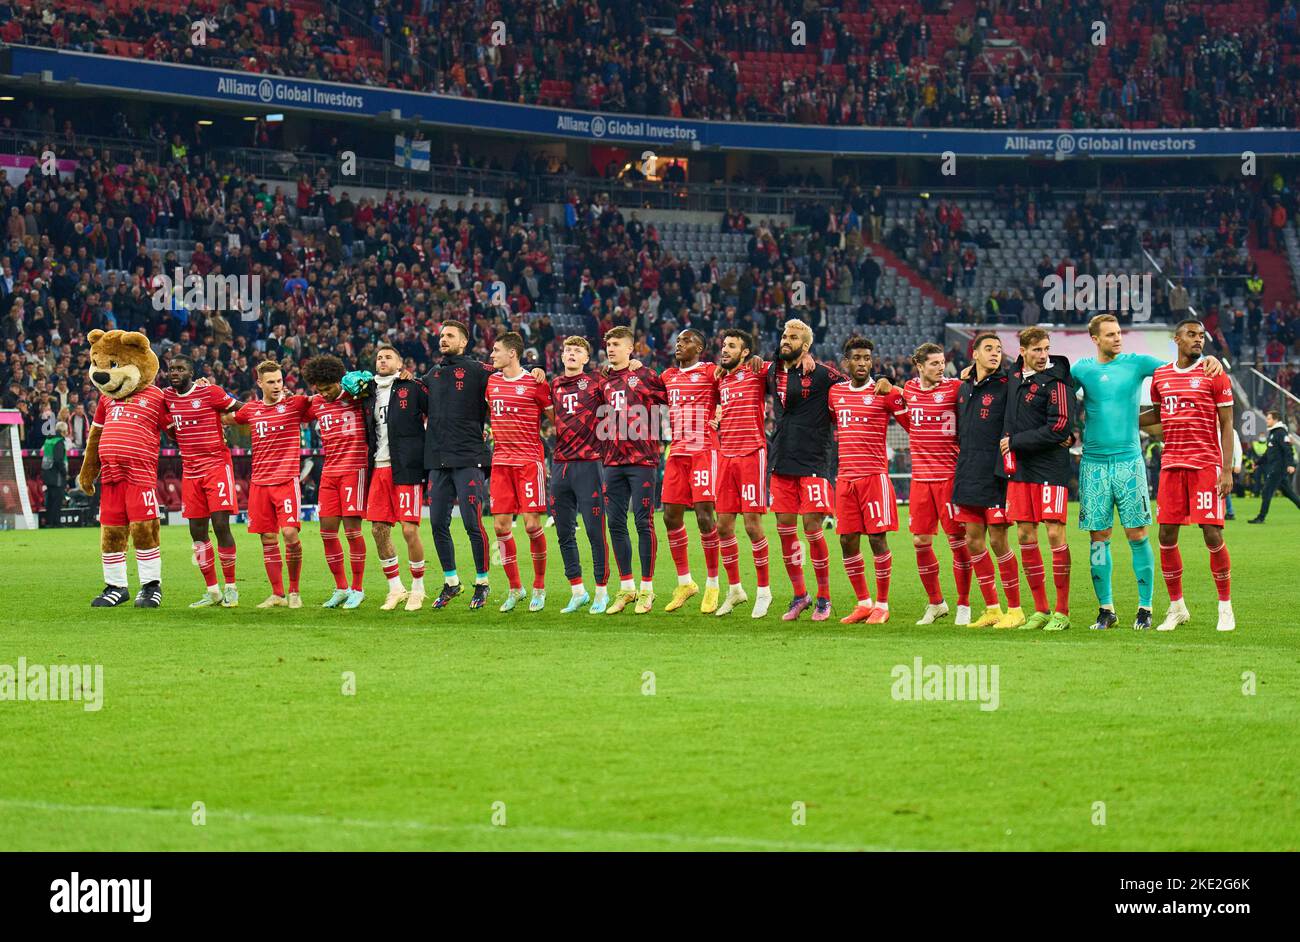 Team FCB celebrate with fans in the match FC BAYERN MÜNCHEN - SV WERDER BREMEN 6-1 1.German Football League on Nov 8, 2022 in Munich, Germany. Season 2022/2023, matchday 14, 1.Bundesliga, FCB, München, 14.Spieltag © Peter Schatz / Alamy Live News    - DFL REGULATIONS PROHIBIT ANY USE OF PHOTOGRAPHS as IMAGE SEQUENCES and/or QUASI-VIDEO - Stock Photo